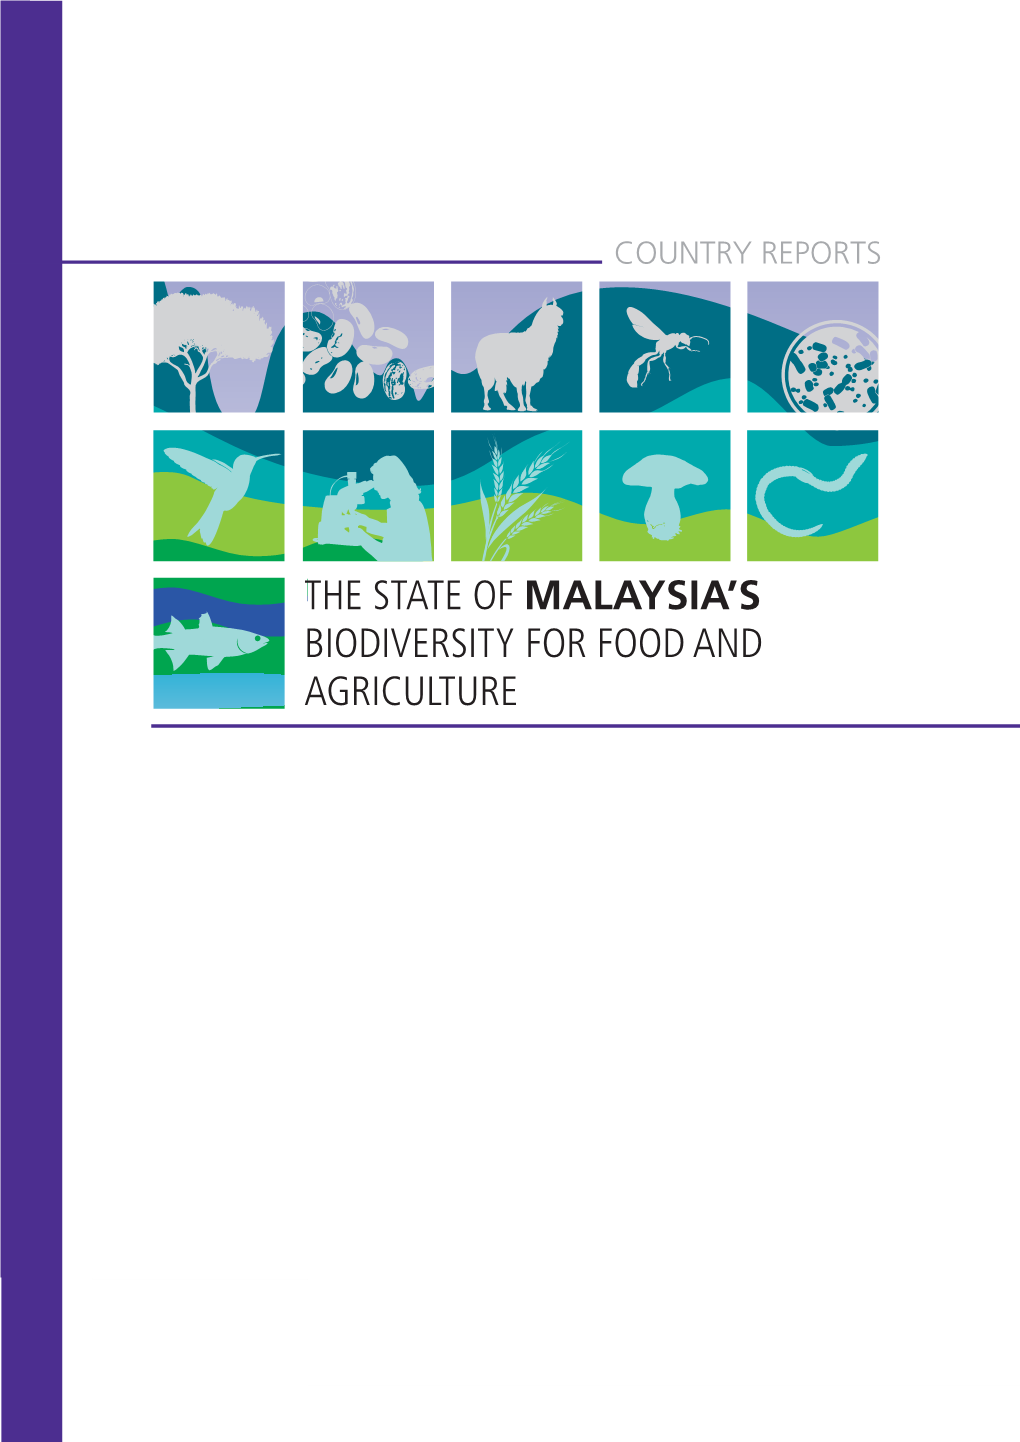 The State of Malaysia's Biodiversity for Food And